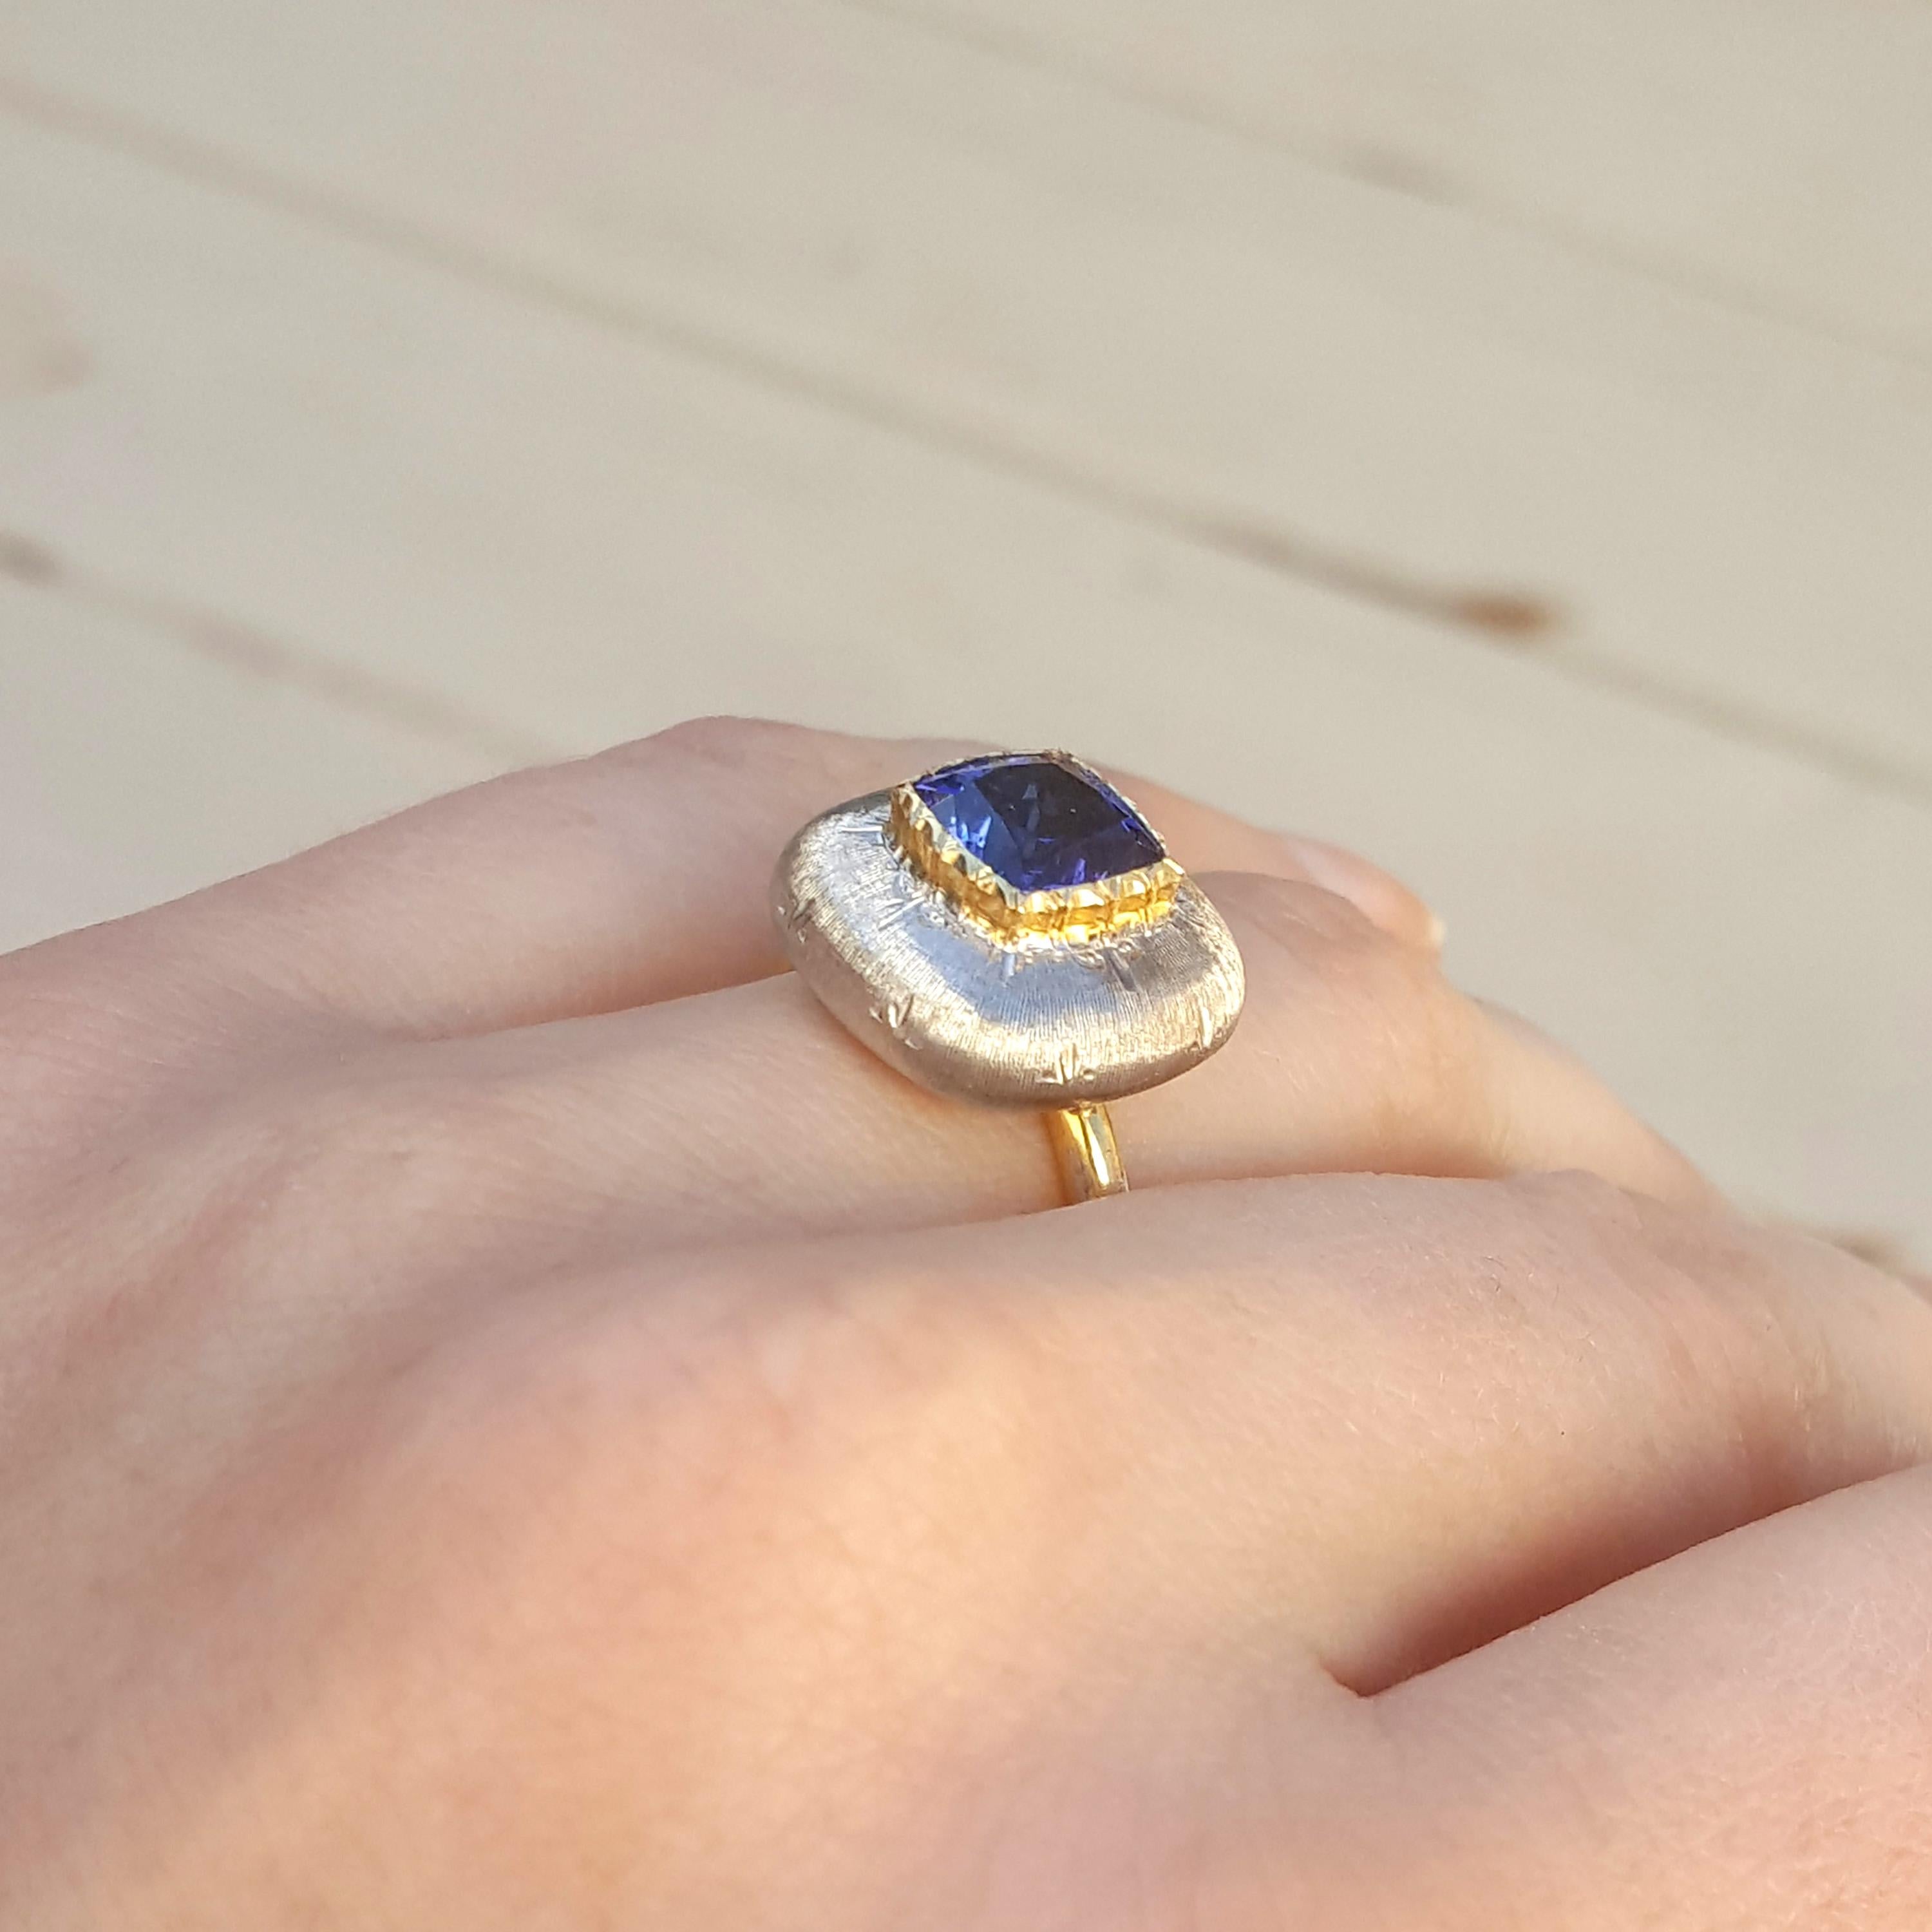 The Bianca style is such an unexpected presentation as a ring, and this tanzanite looks is framed beautifully by this custom version.

This beautifully cut tanzanite has a rich and deep lavender hue, which is always difficult to source in this size